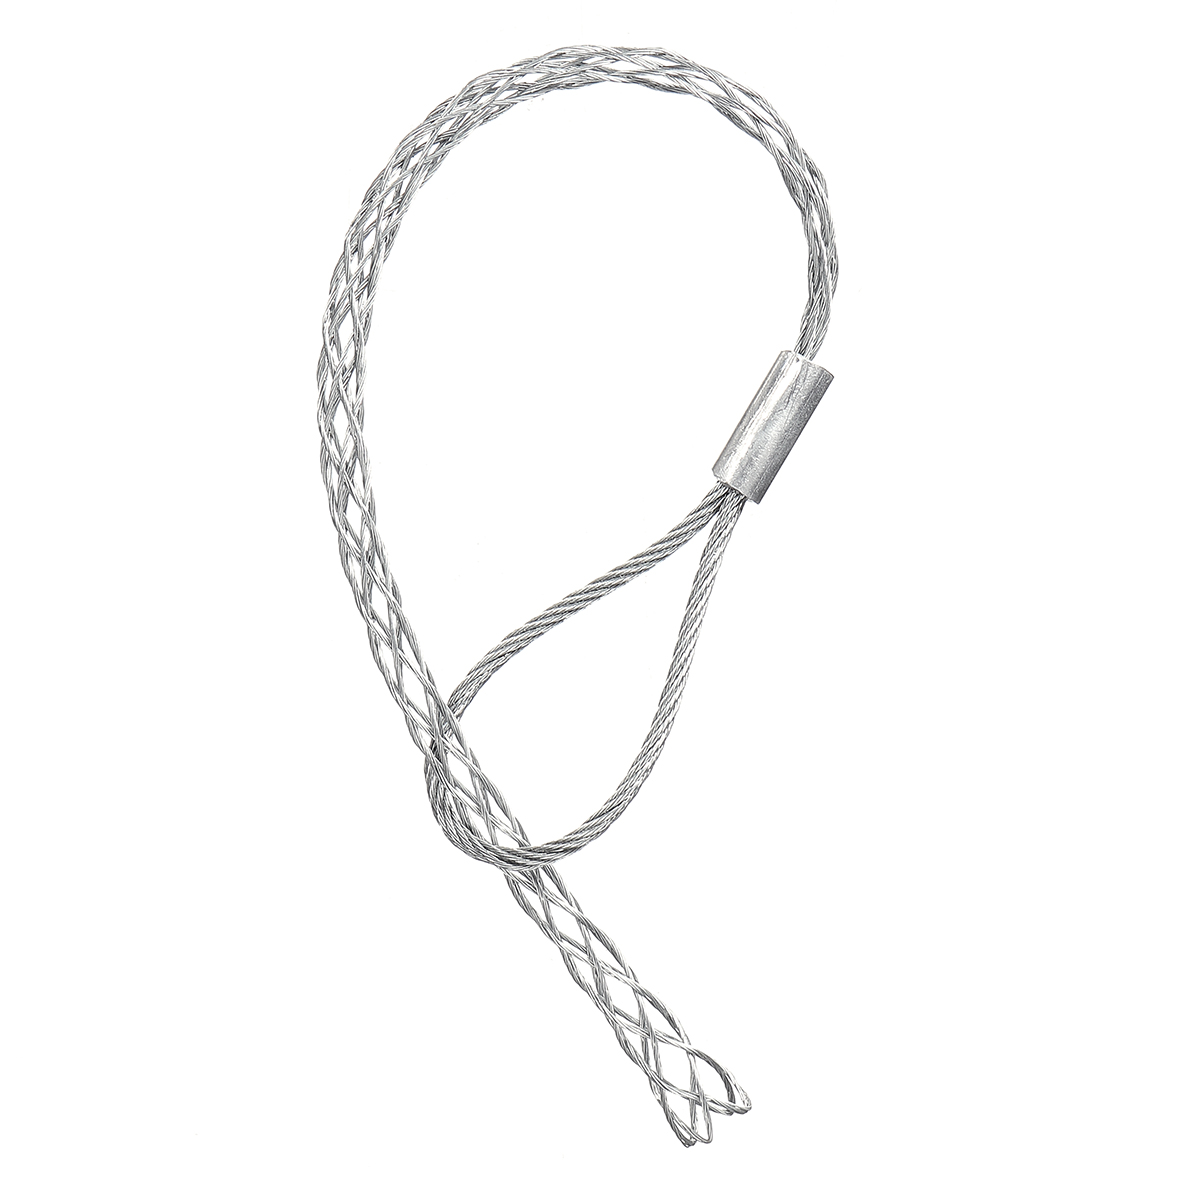 4-25mm-Wire-Cable-Pulling-Socks-Grip-For-Telstra-NBN-Tools-Heavy-Duty-Tools-Stainless-Steel--Code-1381321-2